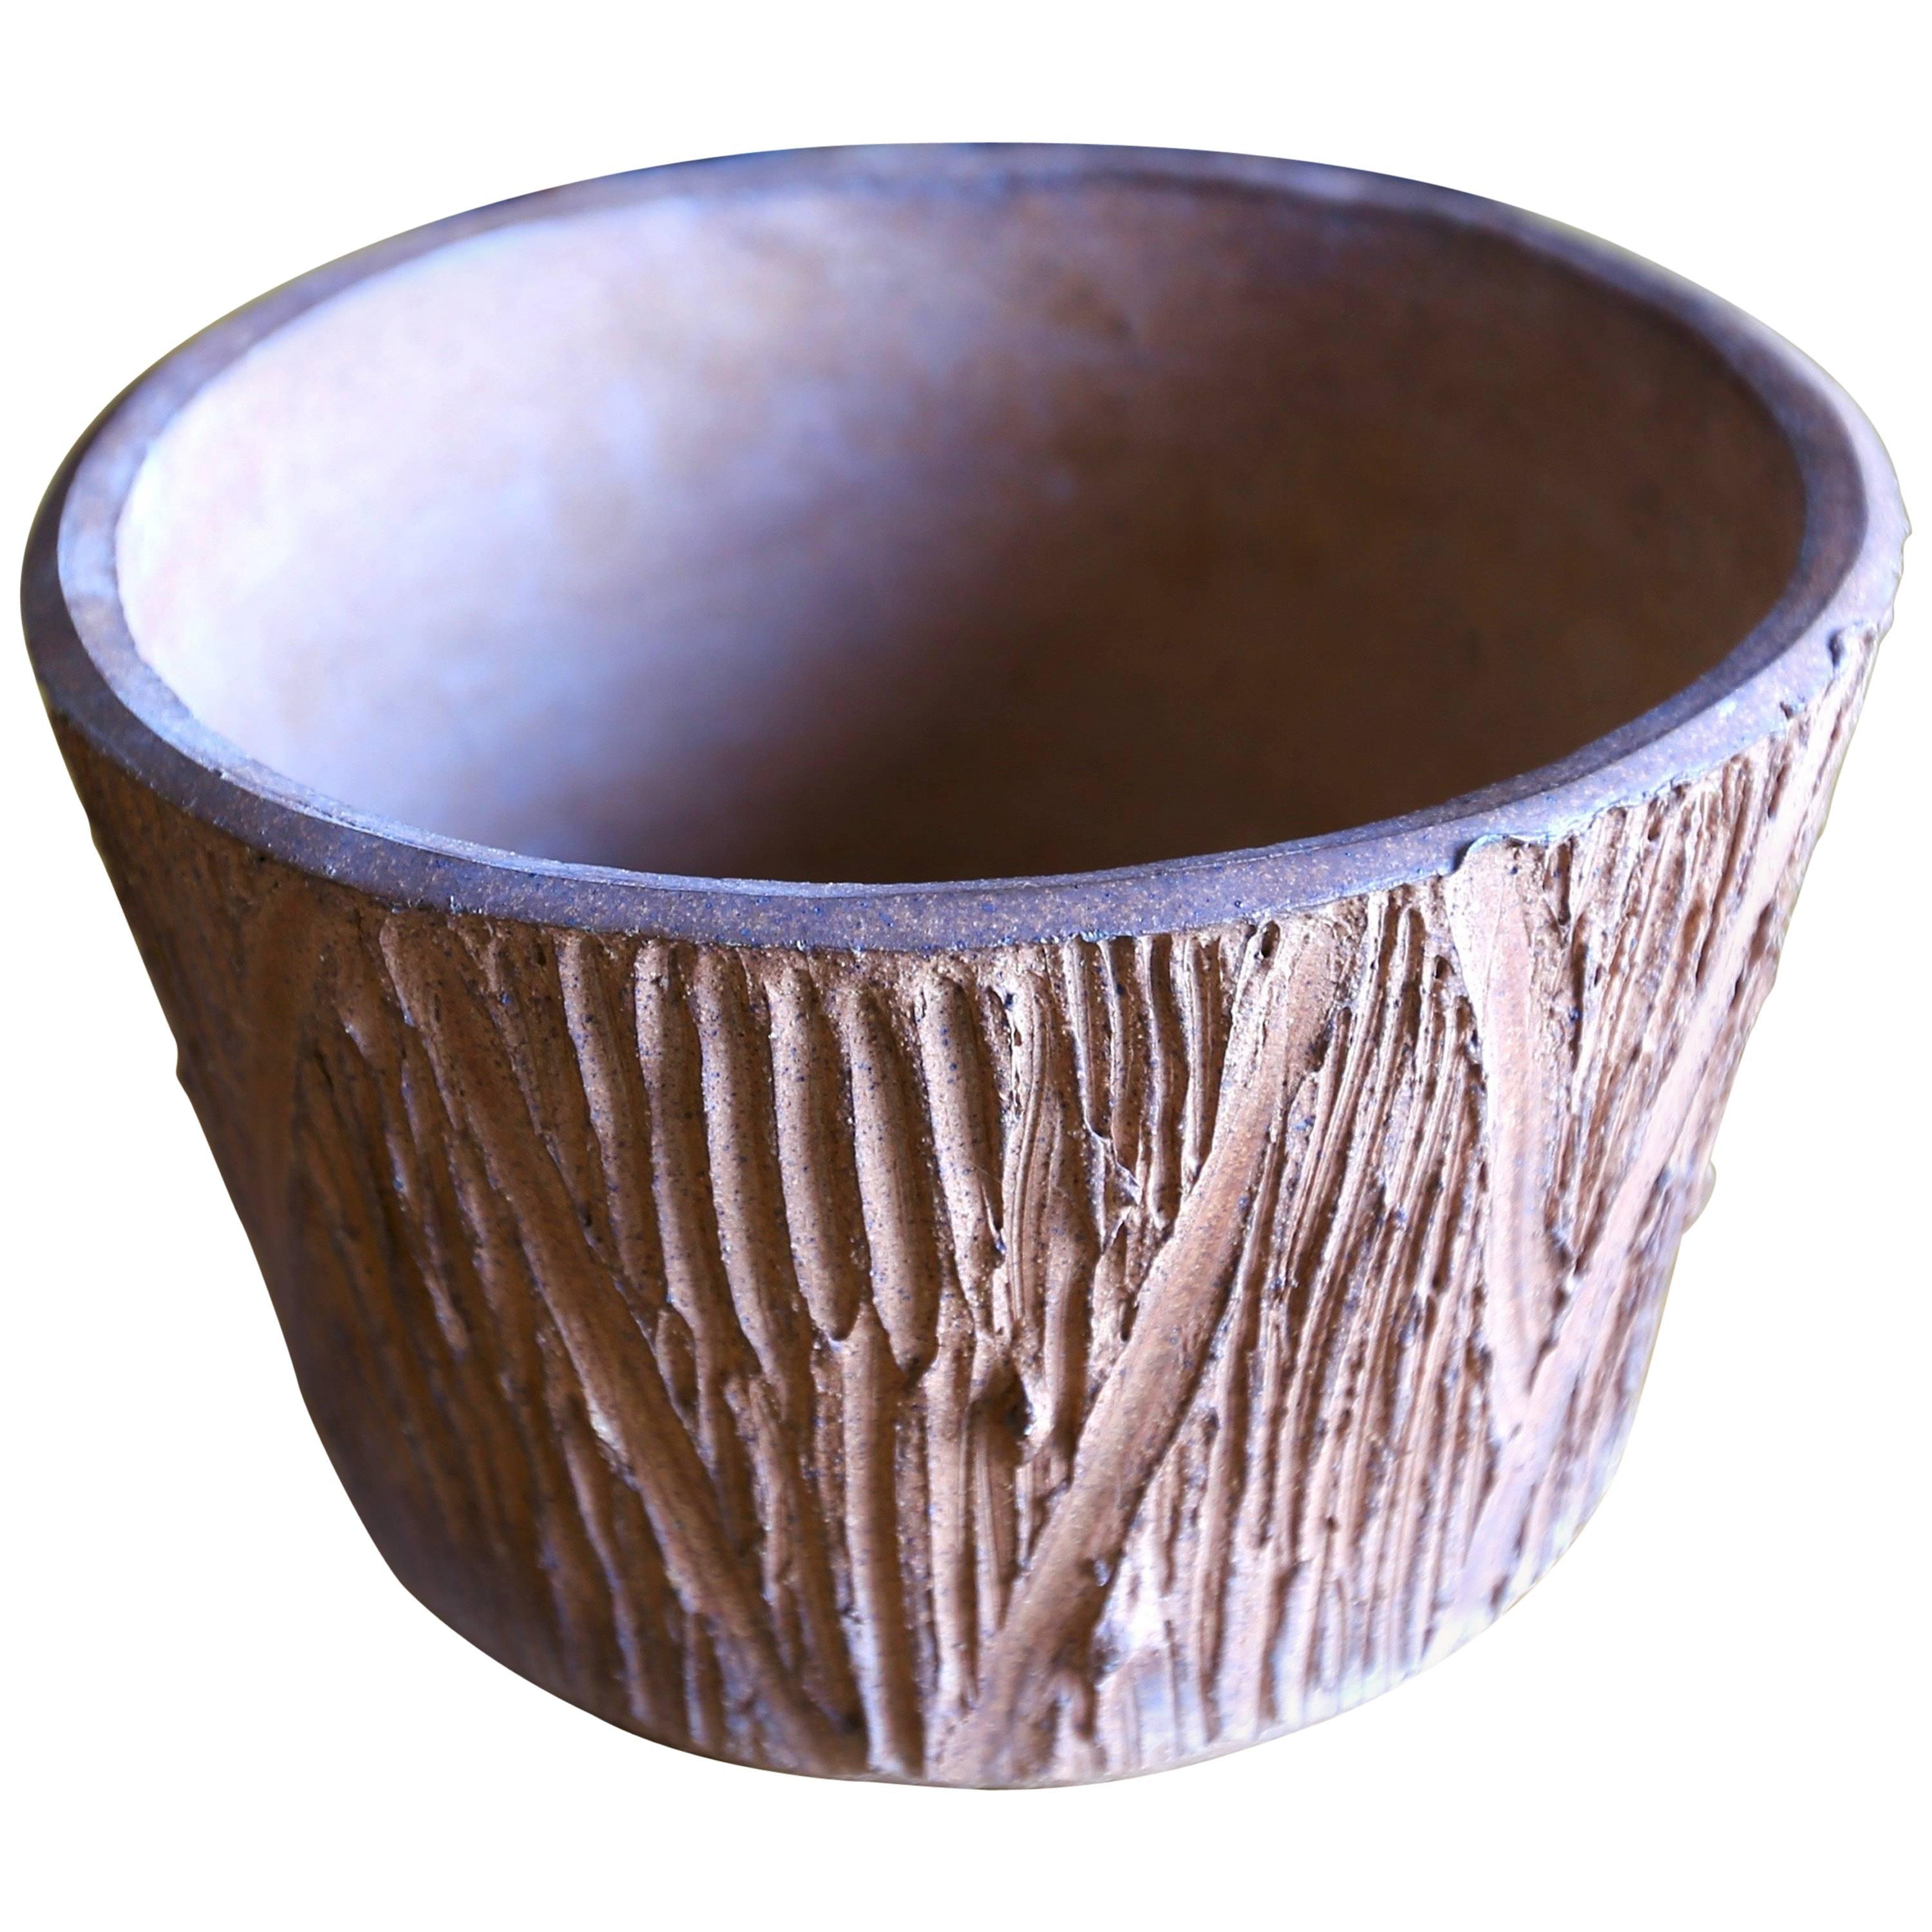 "Scratch" Pattern Planter by David Cressey for Architectural Pottery